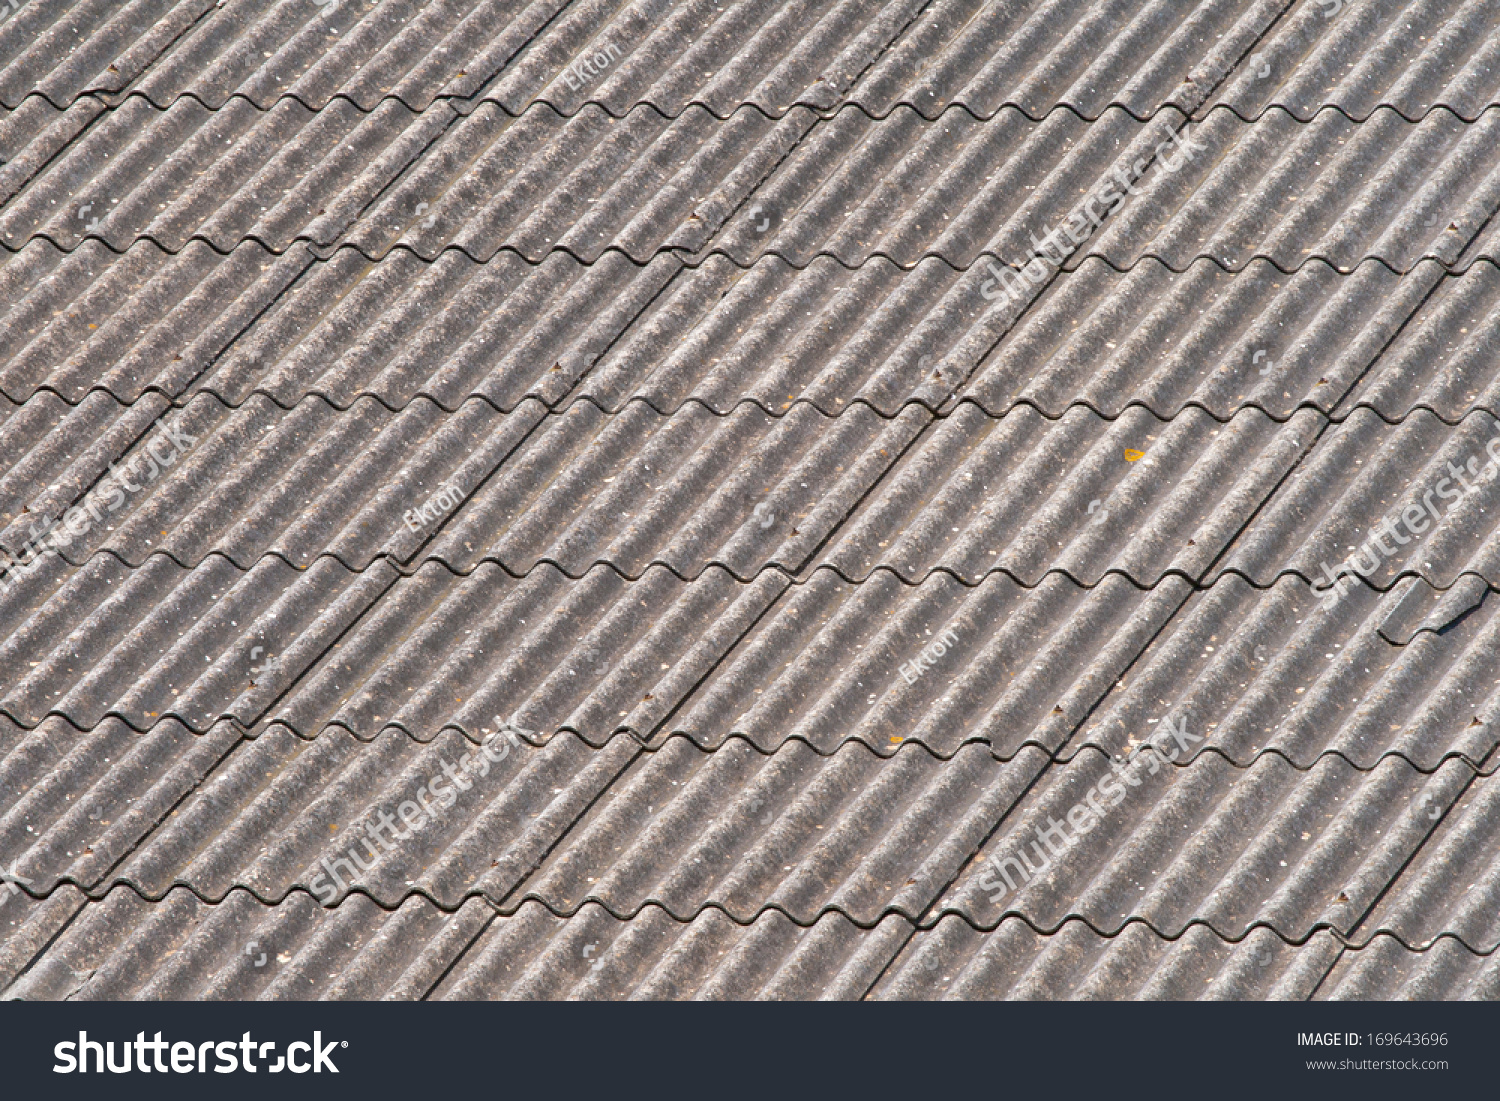 Corrugated Asbestos Cement Roof Stock Photo 169643696 | Shutterstock